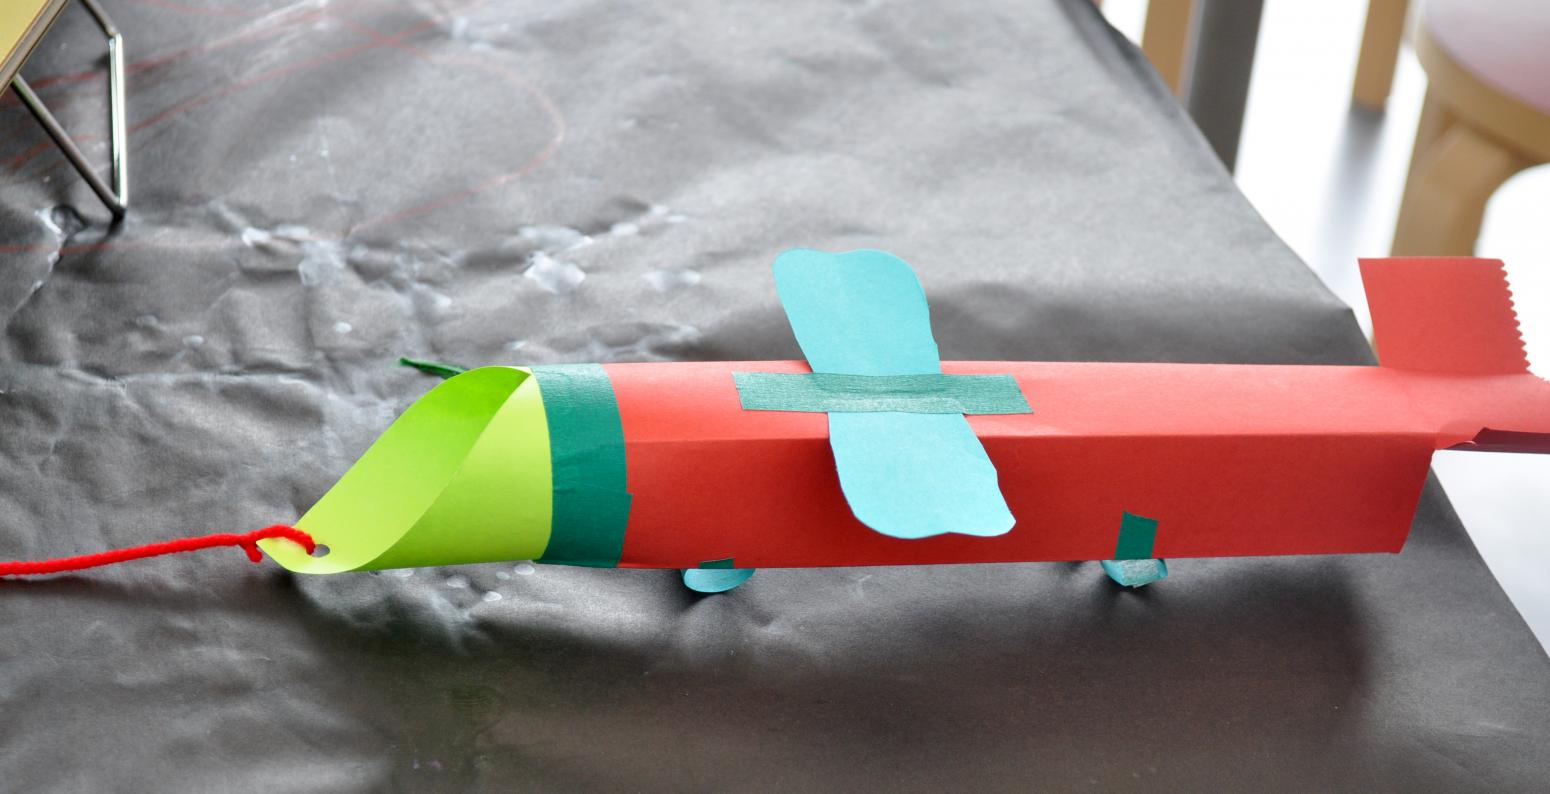 A sculpture of an airplane made out of red, green, and blue construction paper.